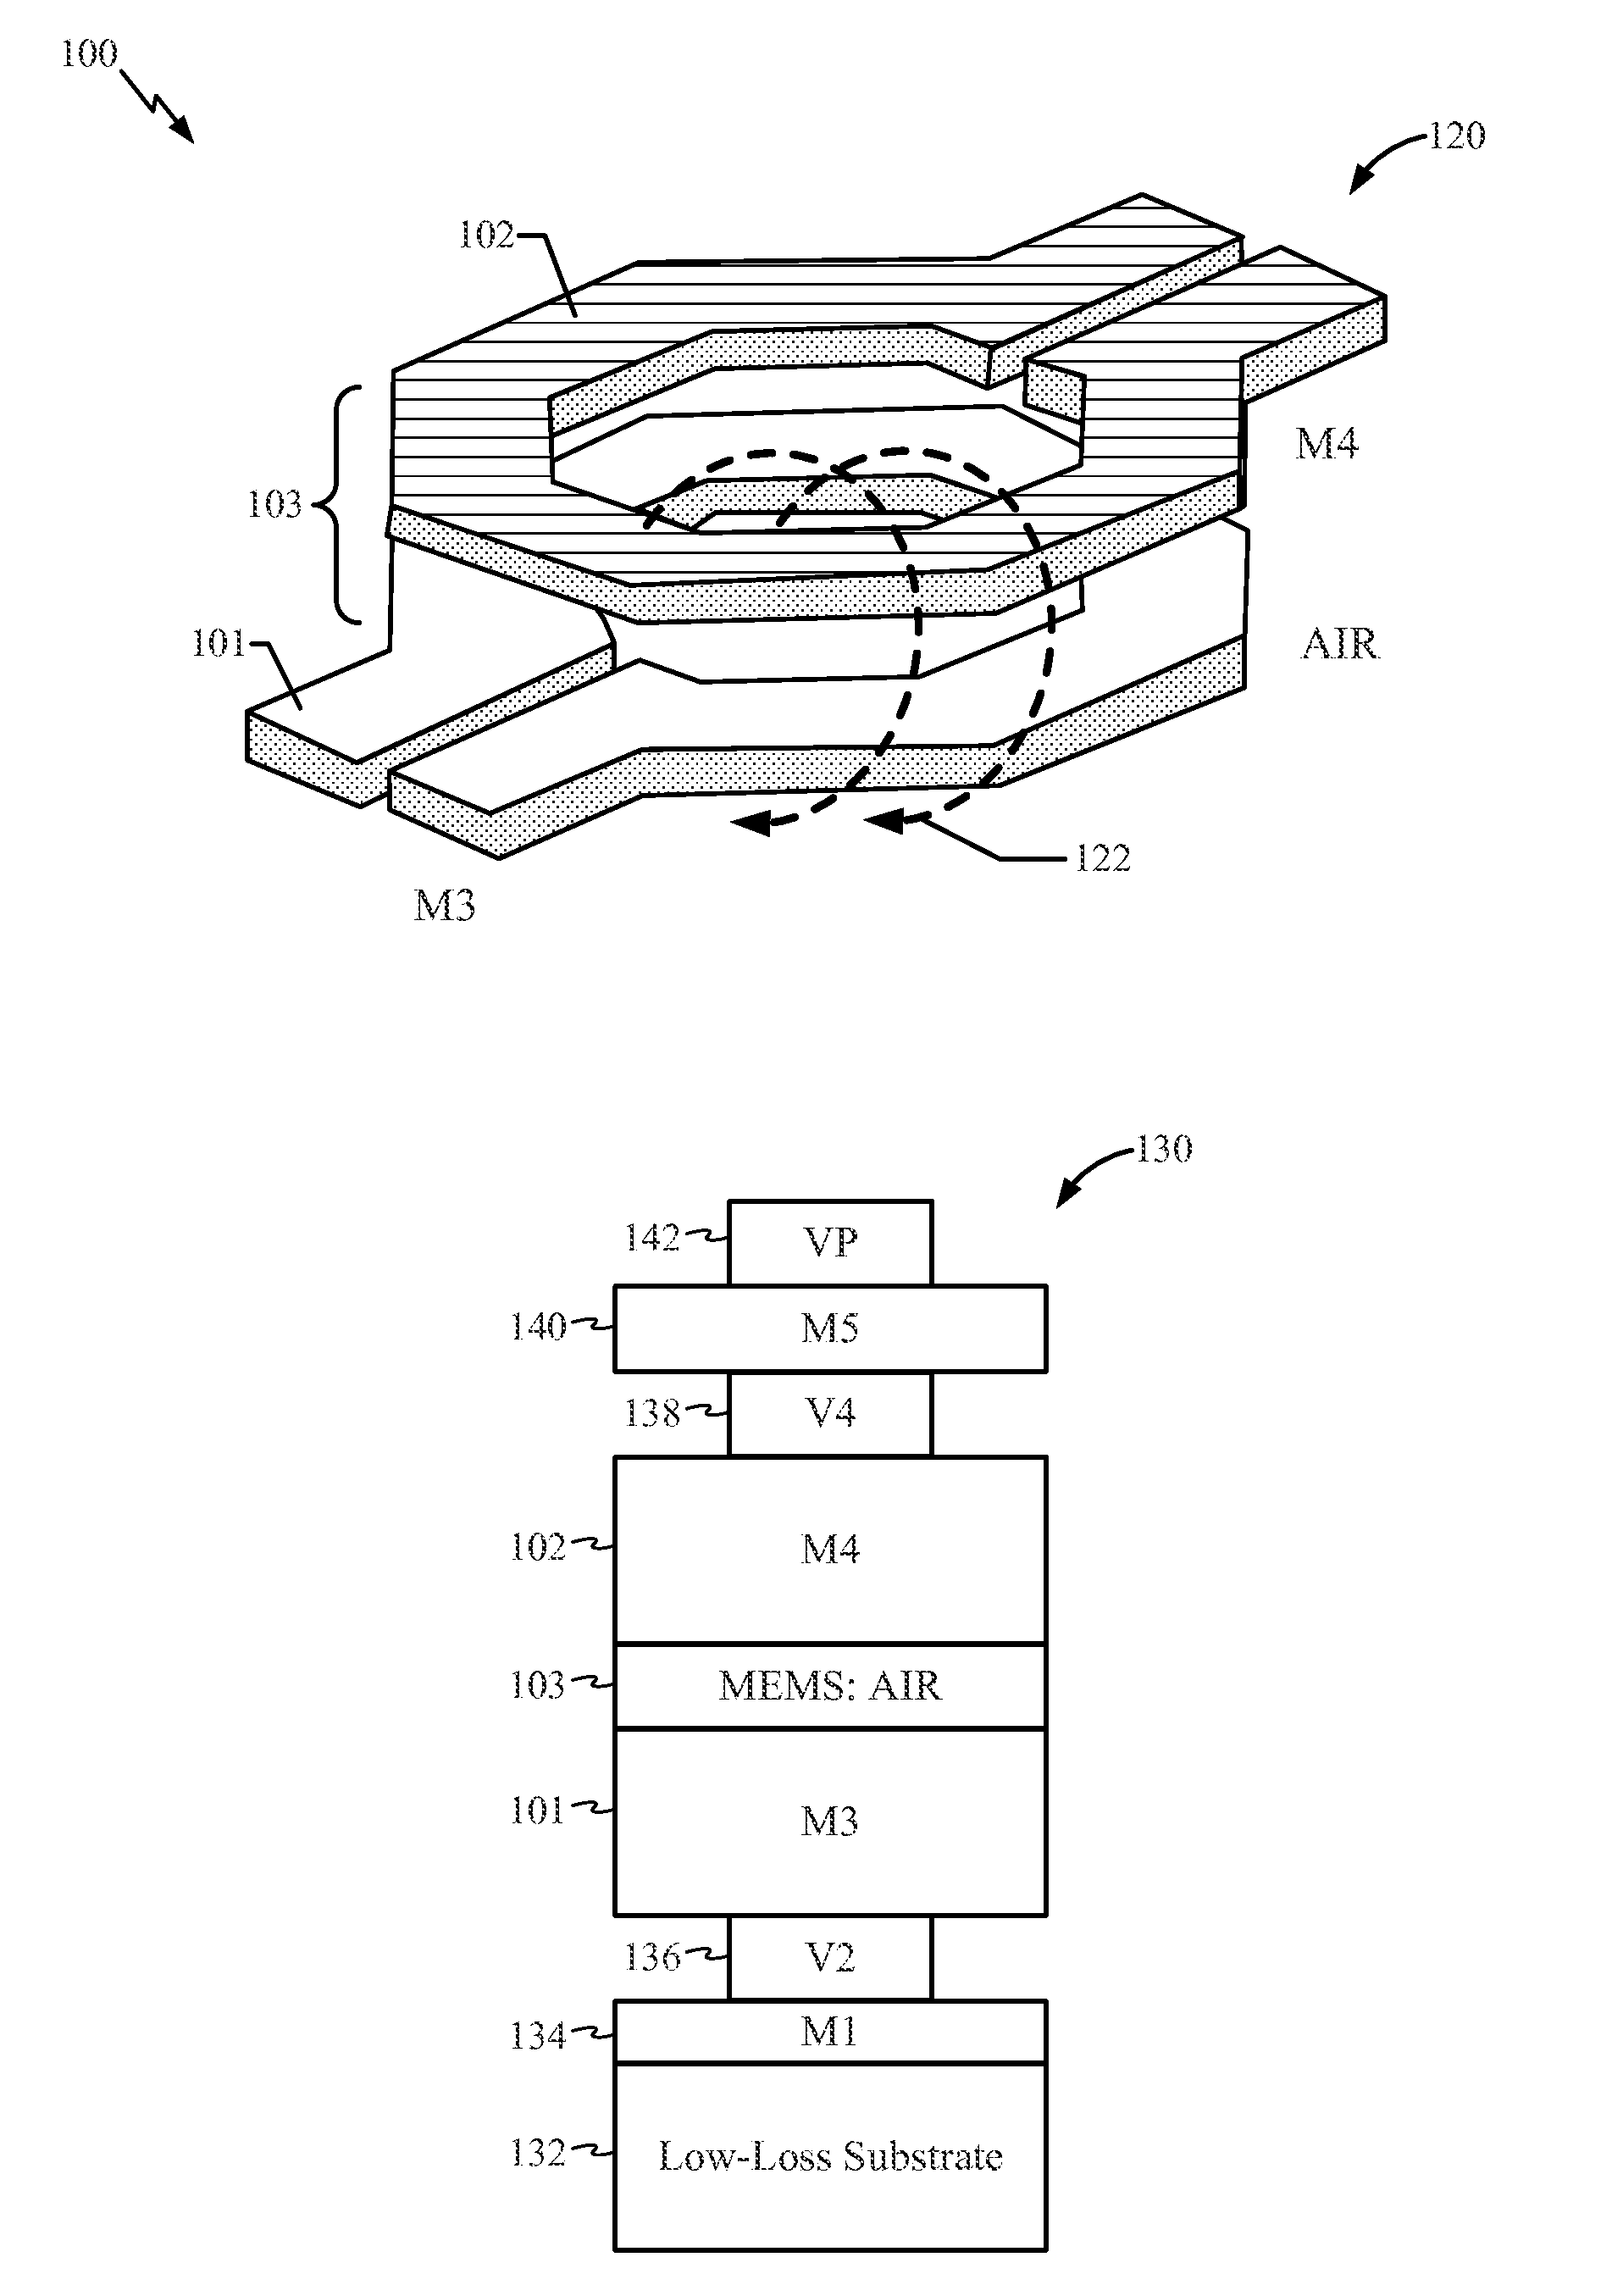 Vertical-coupling transformer with an air-gap structure